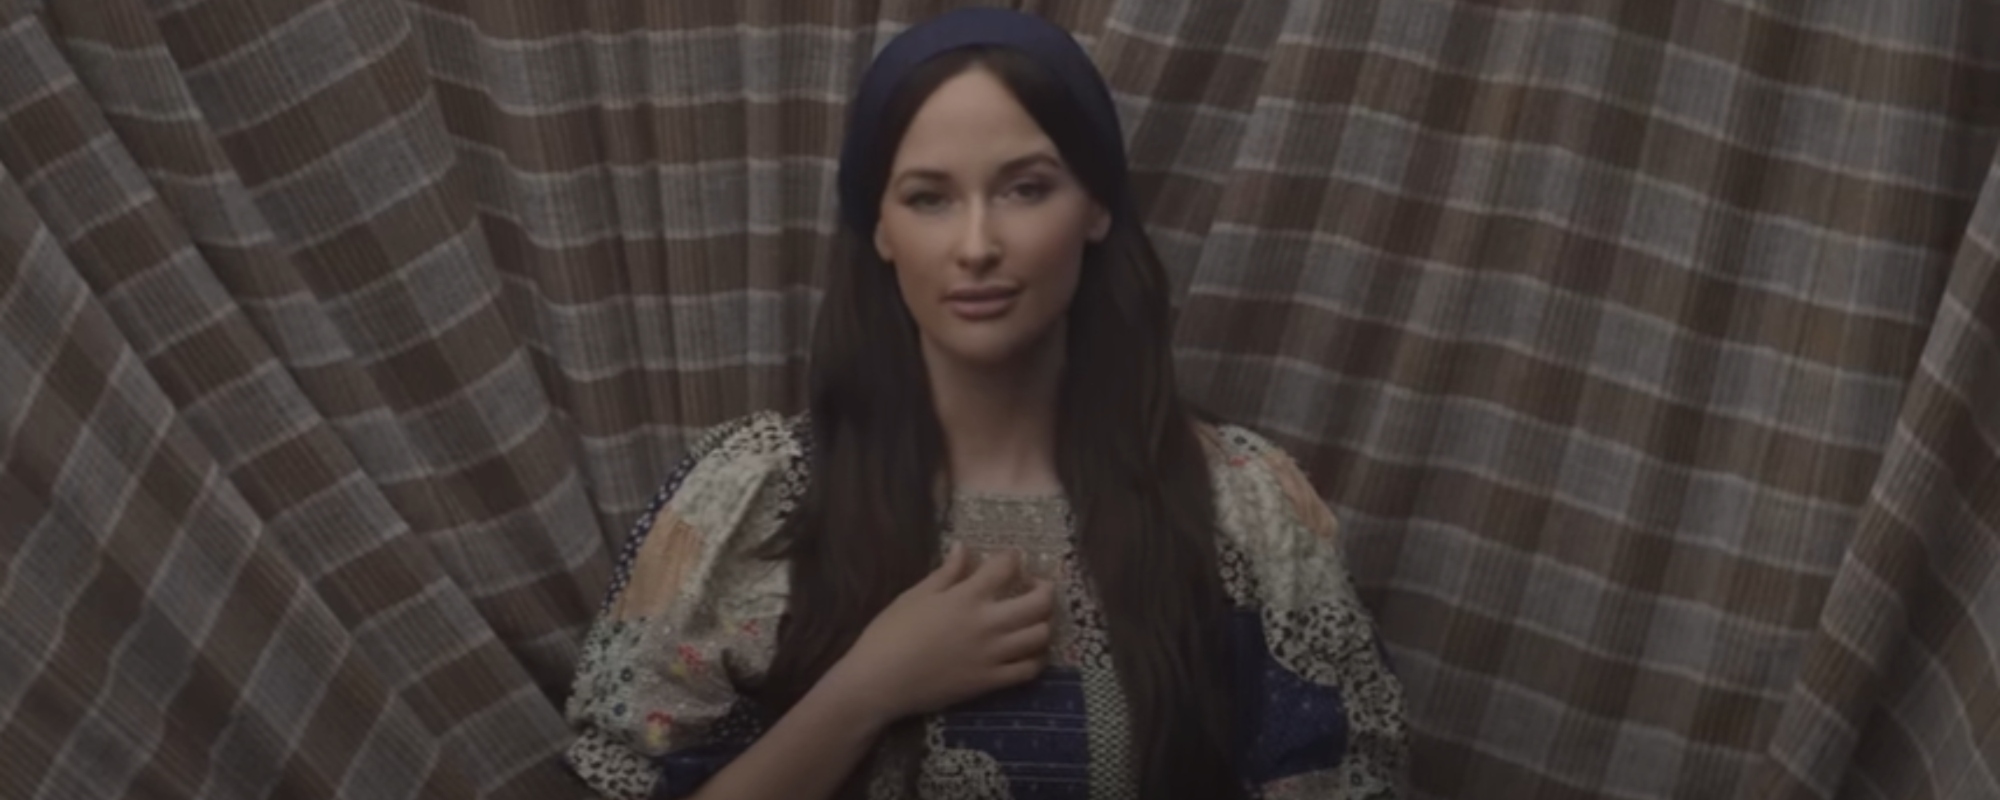 Kacey Musgraves Finds a “Deeper Well” on Newest Single, Announces Album